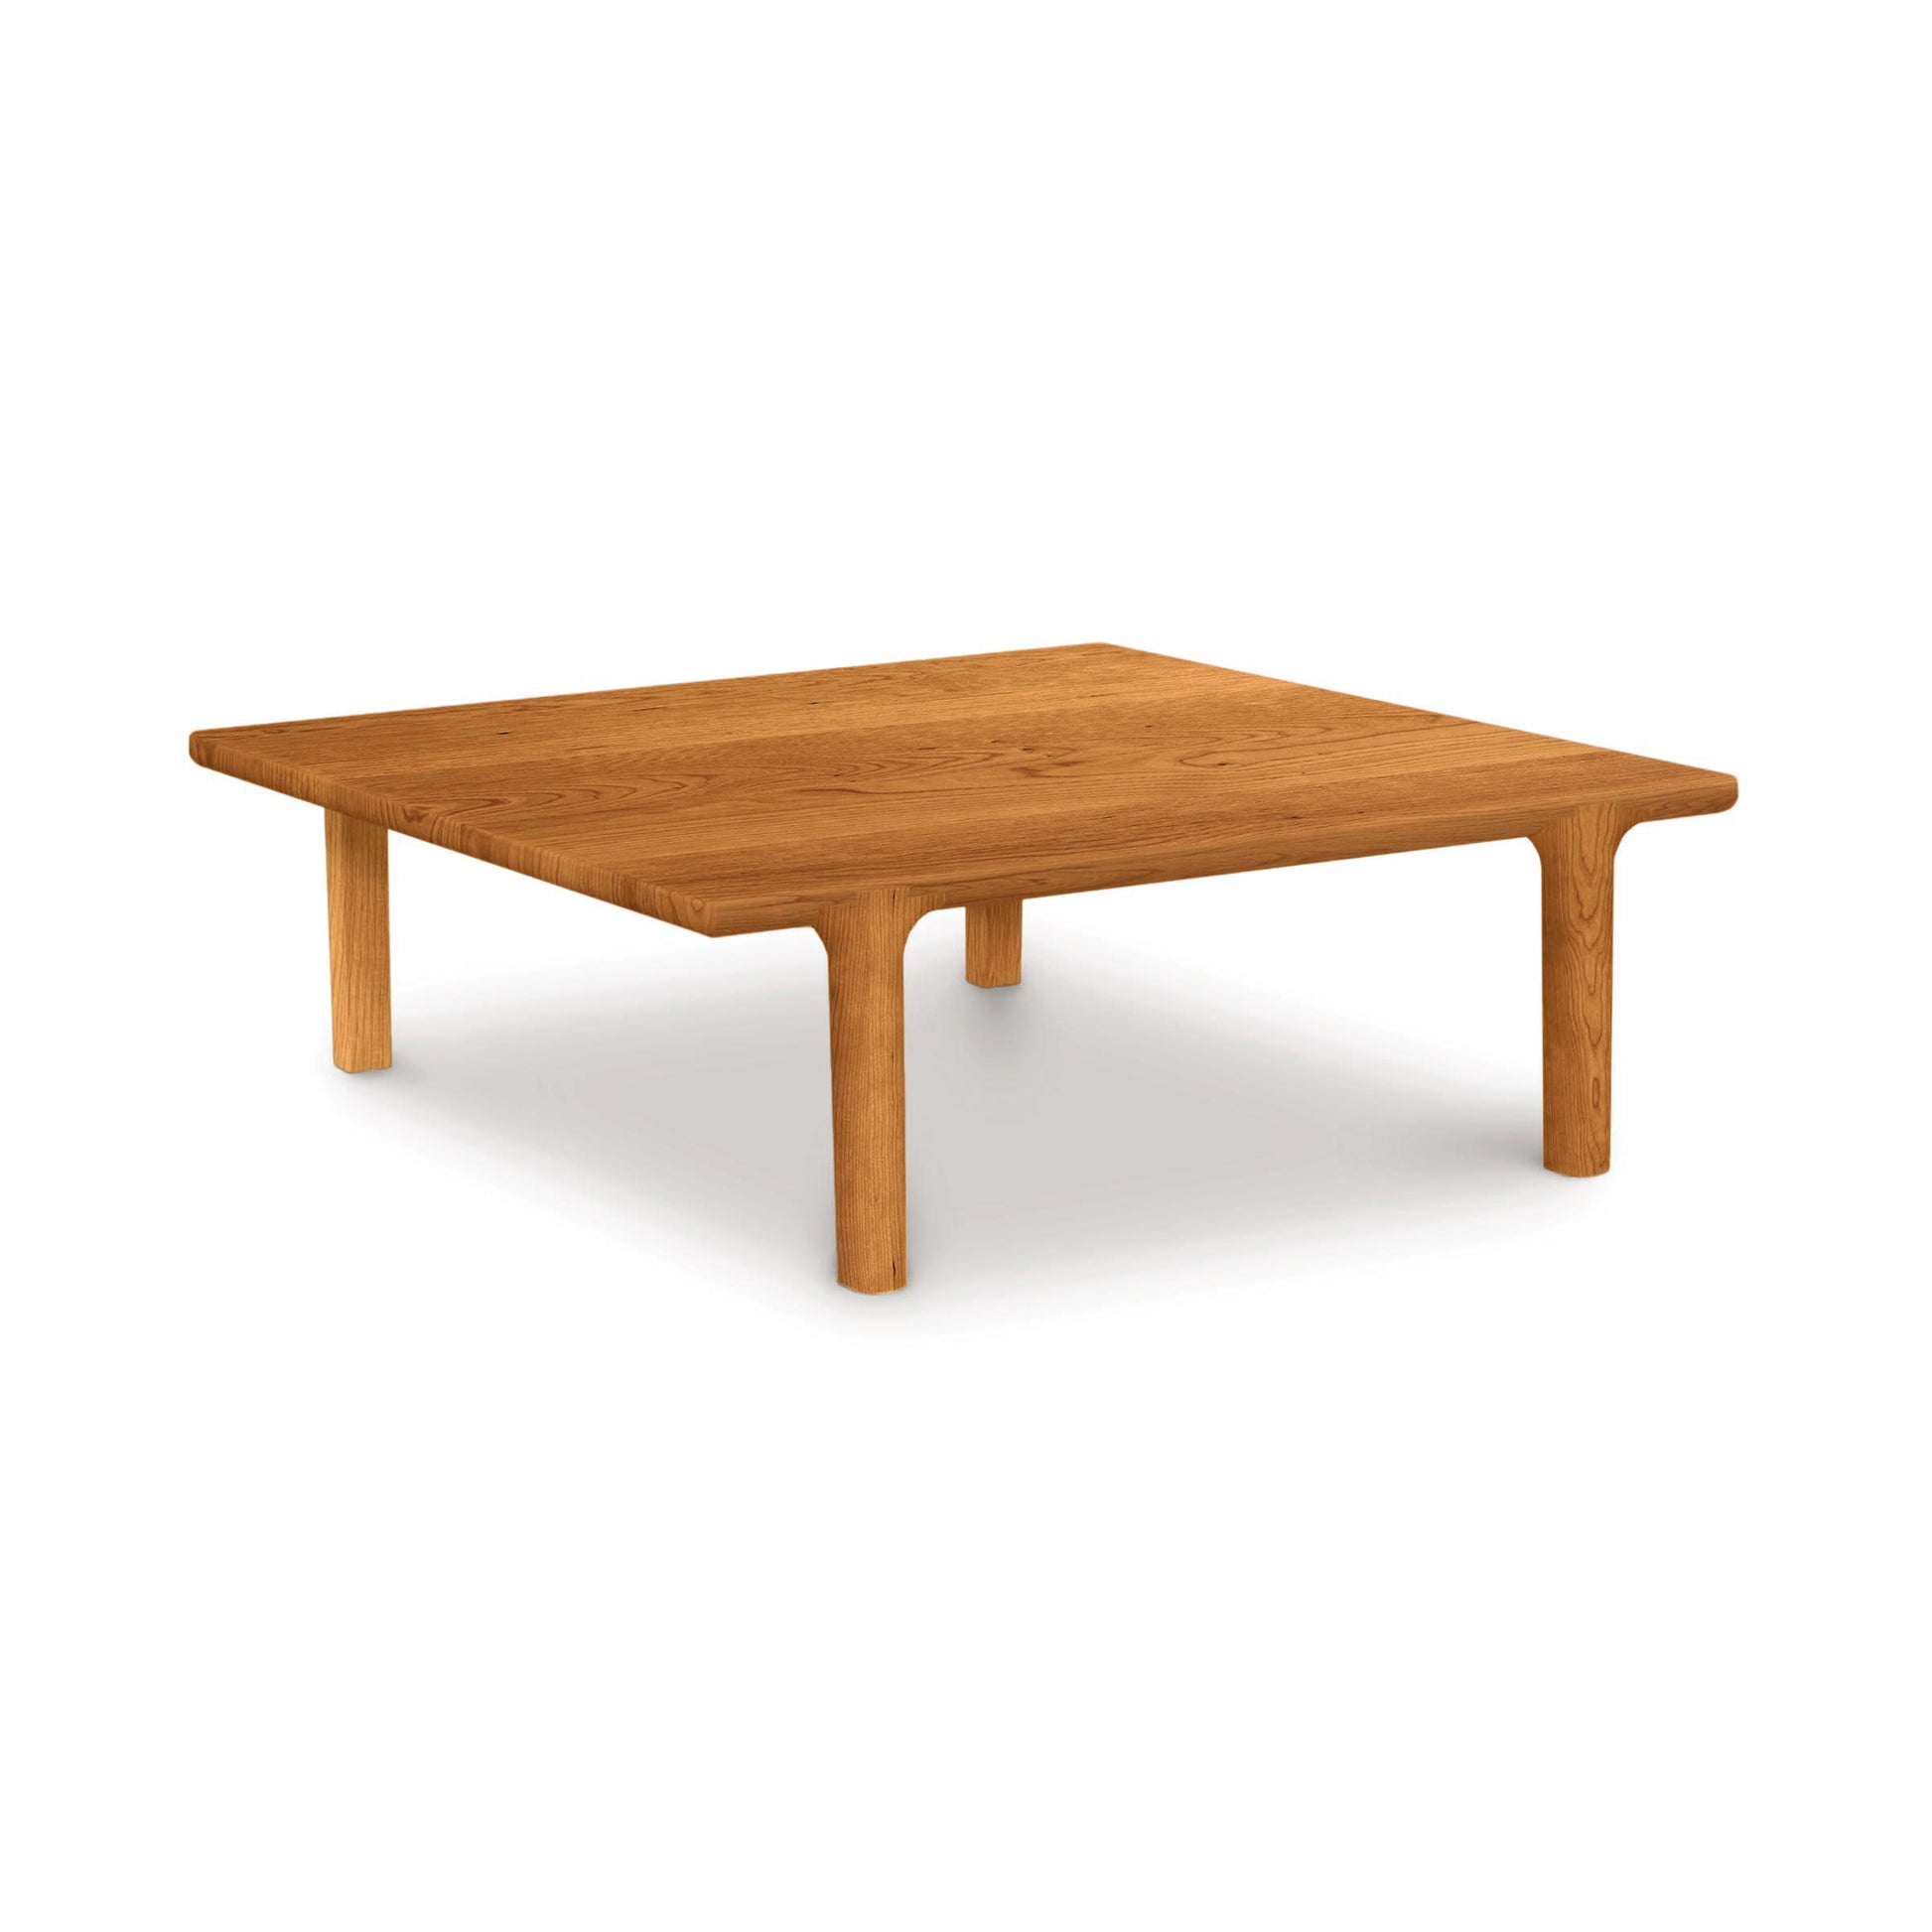 The Copeland Furniture Sierra Square Coffee Table is a contemporary wooden table with legs.